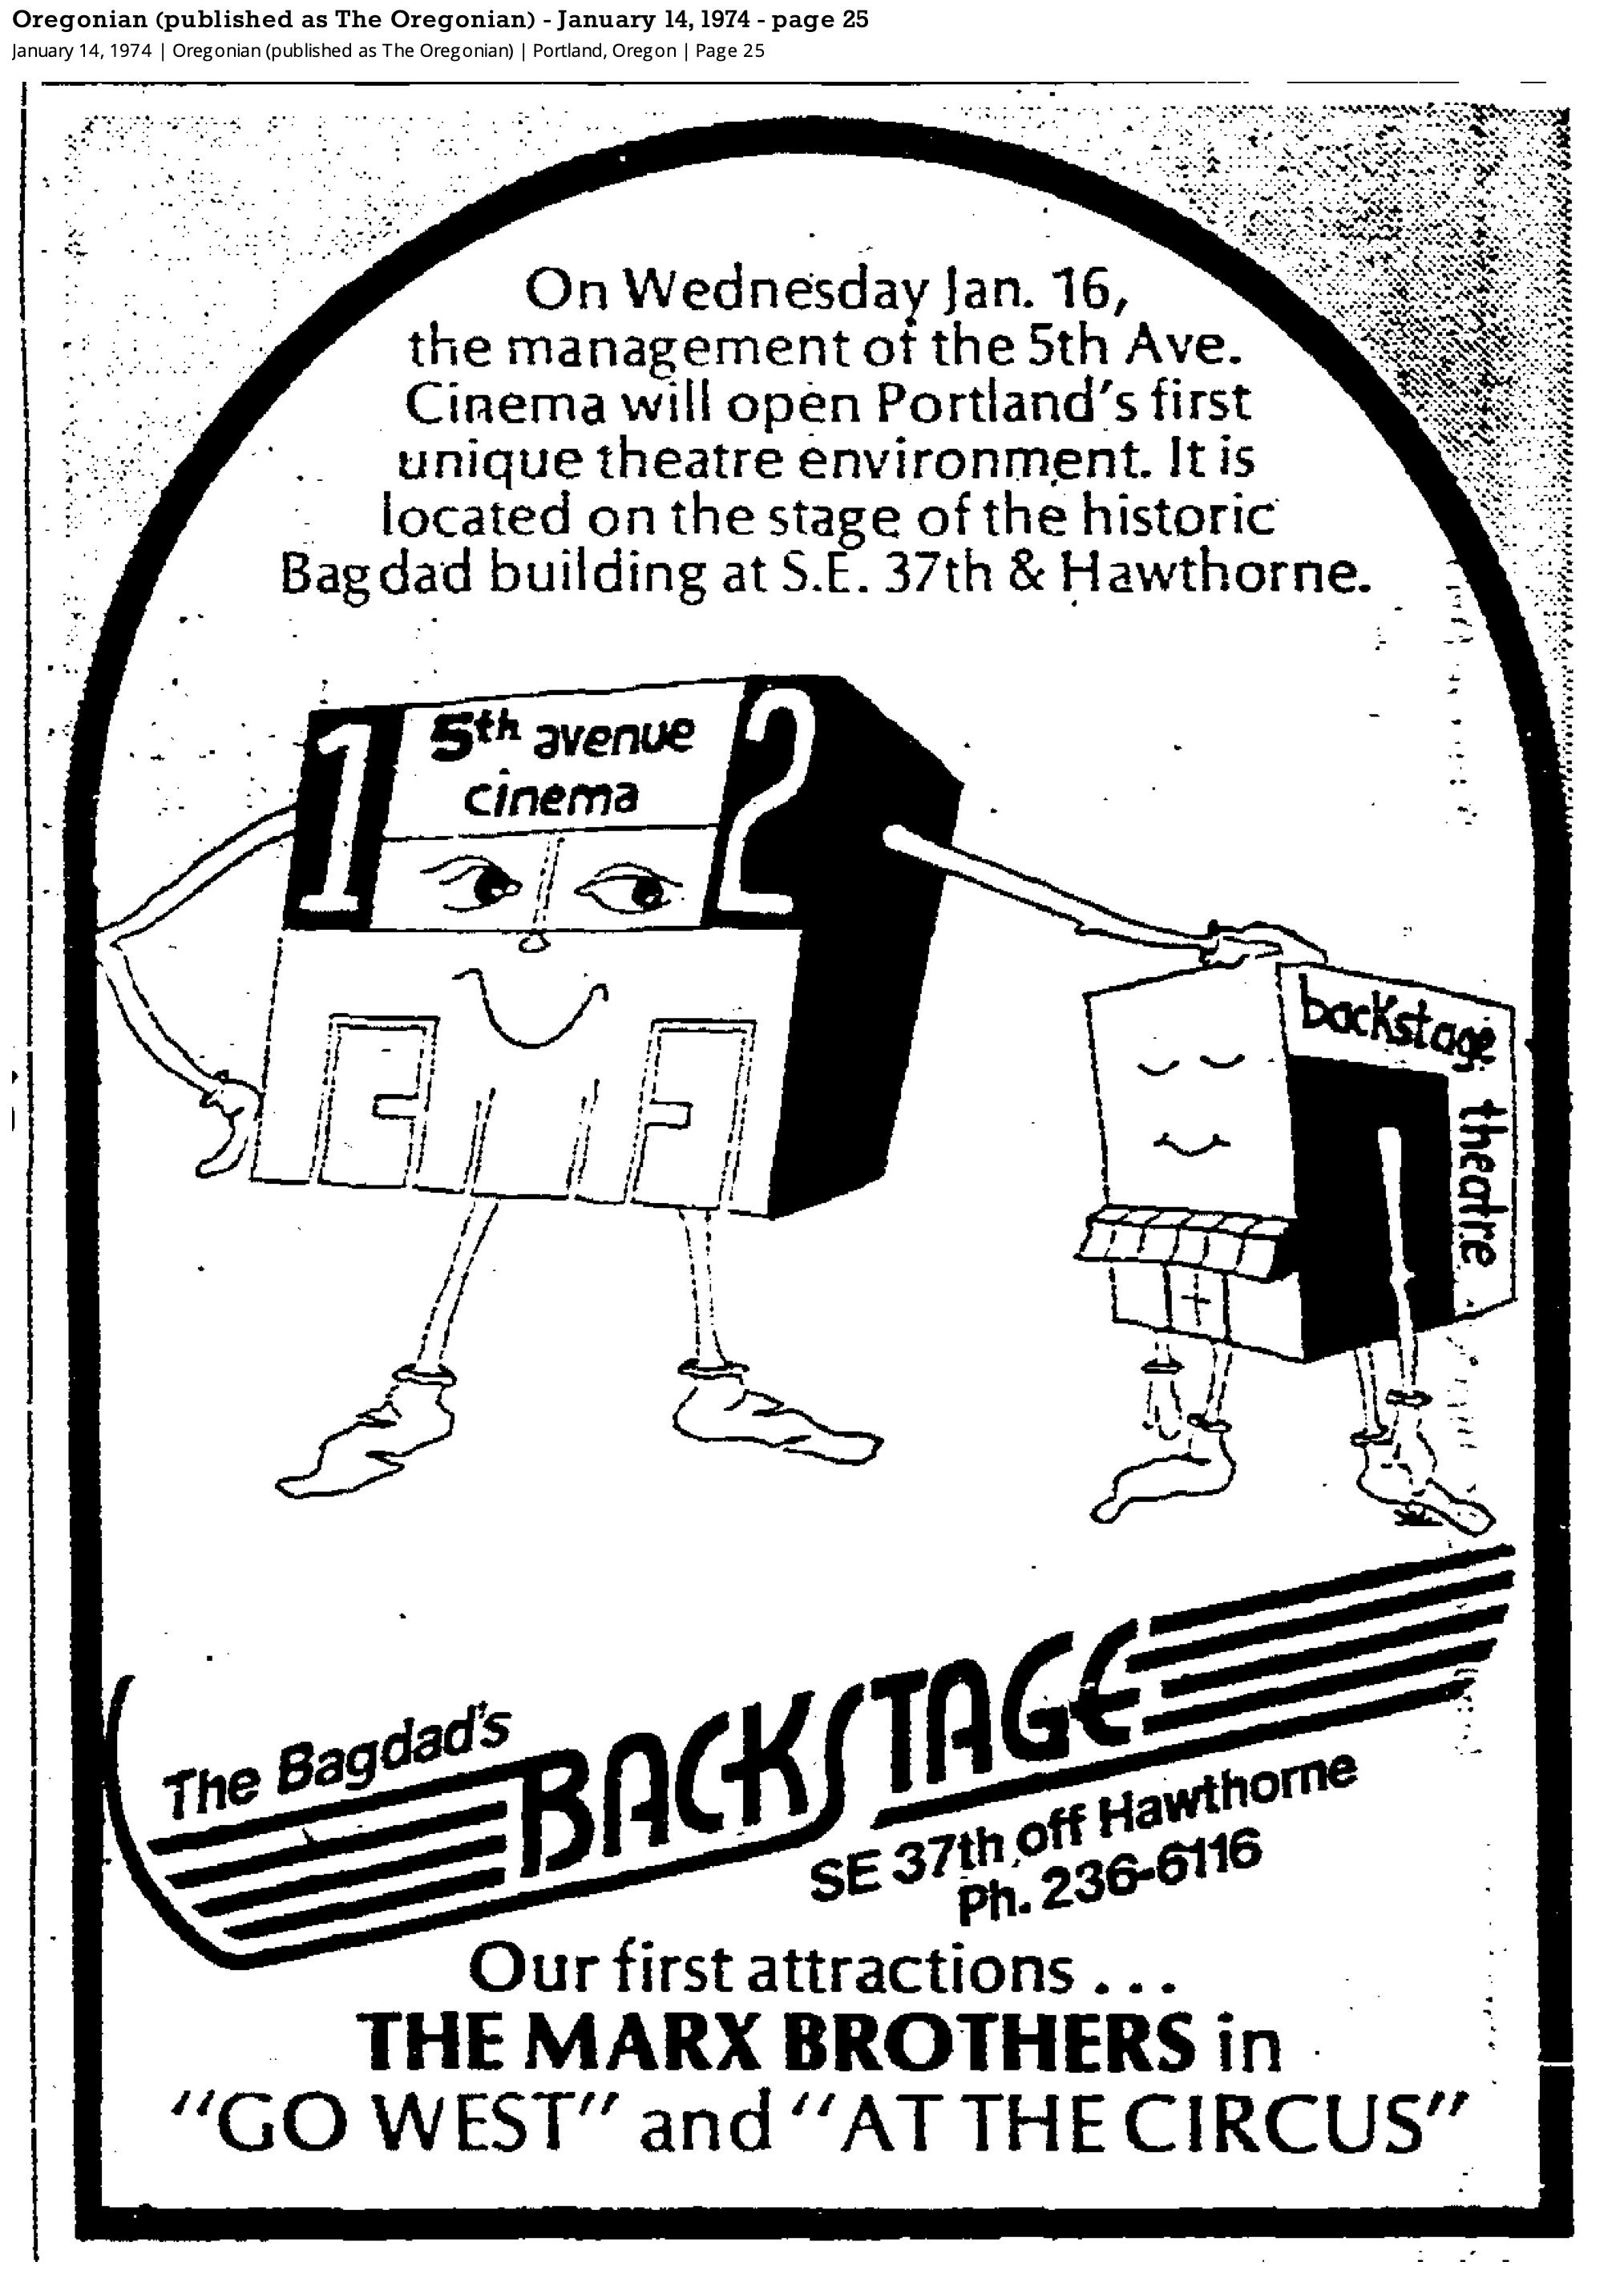 newspaper clipping of an advertisement for the opening of the backstage theater